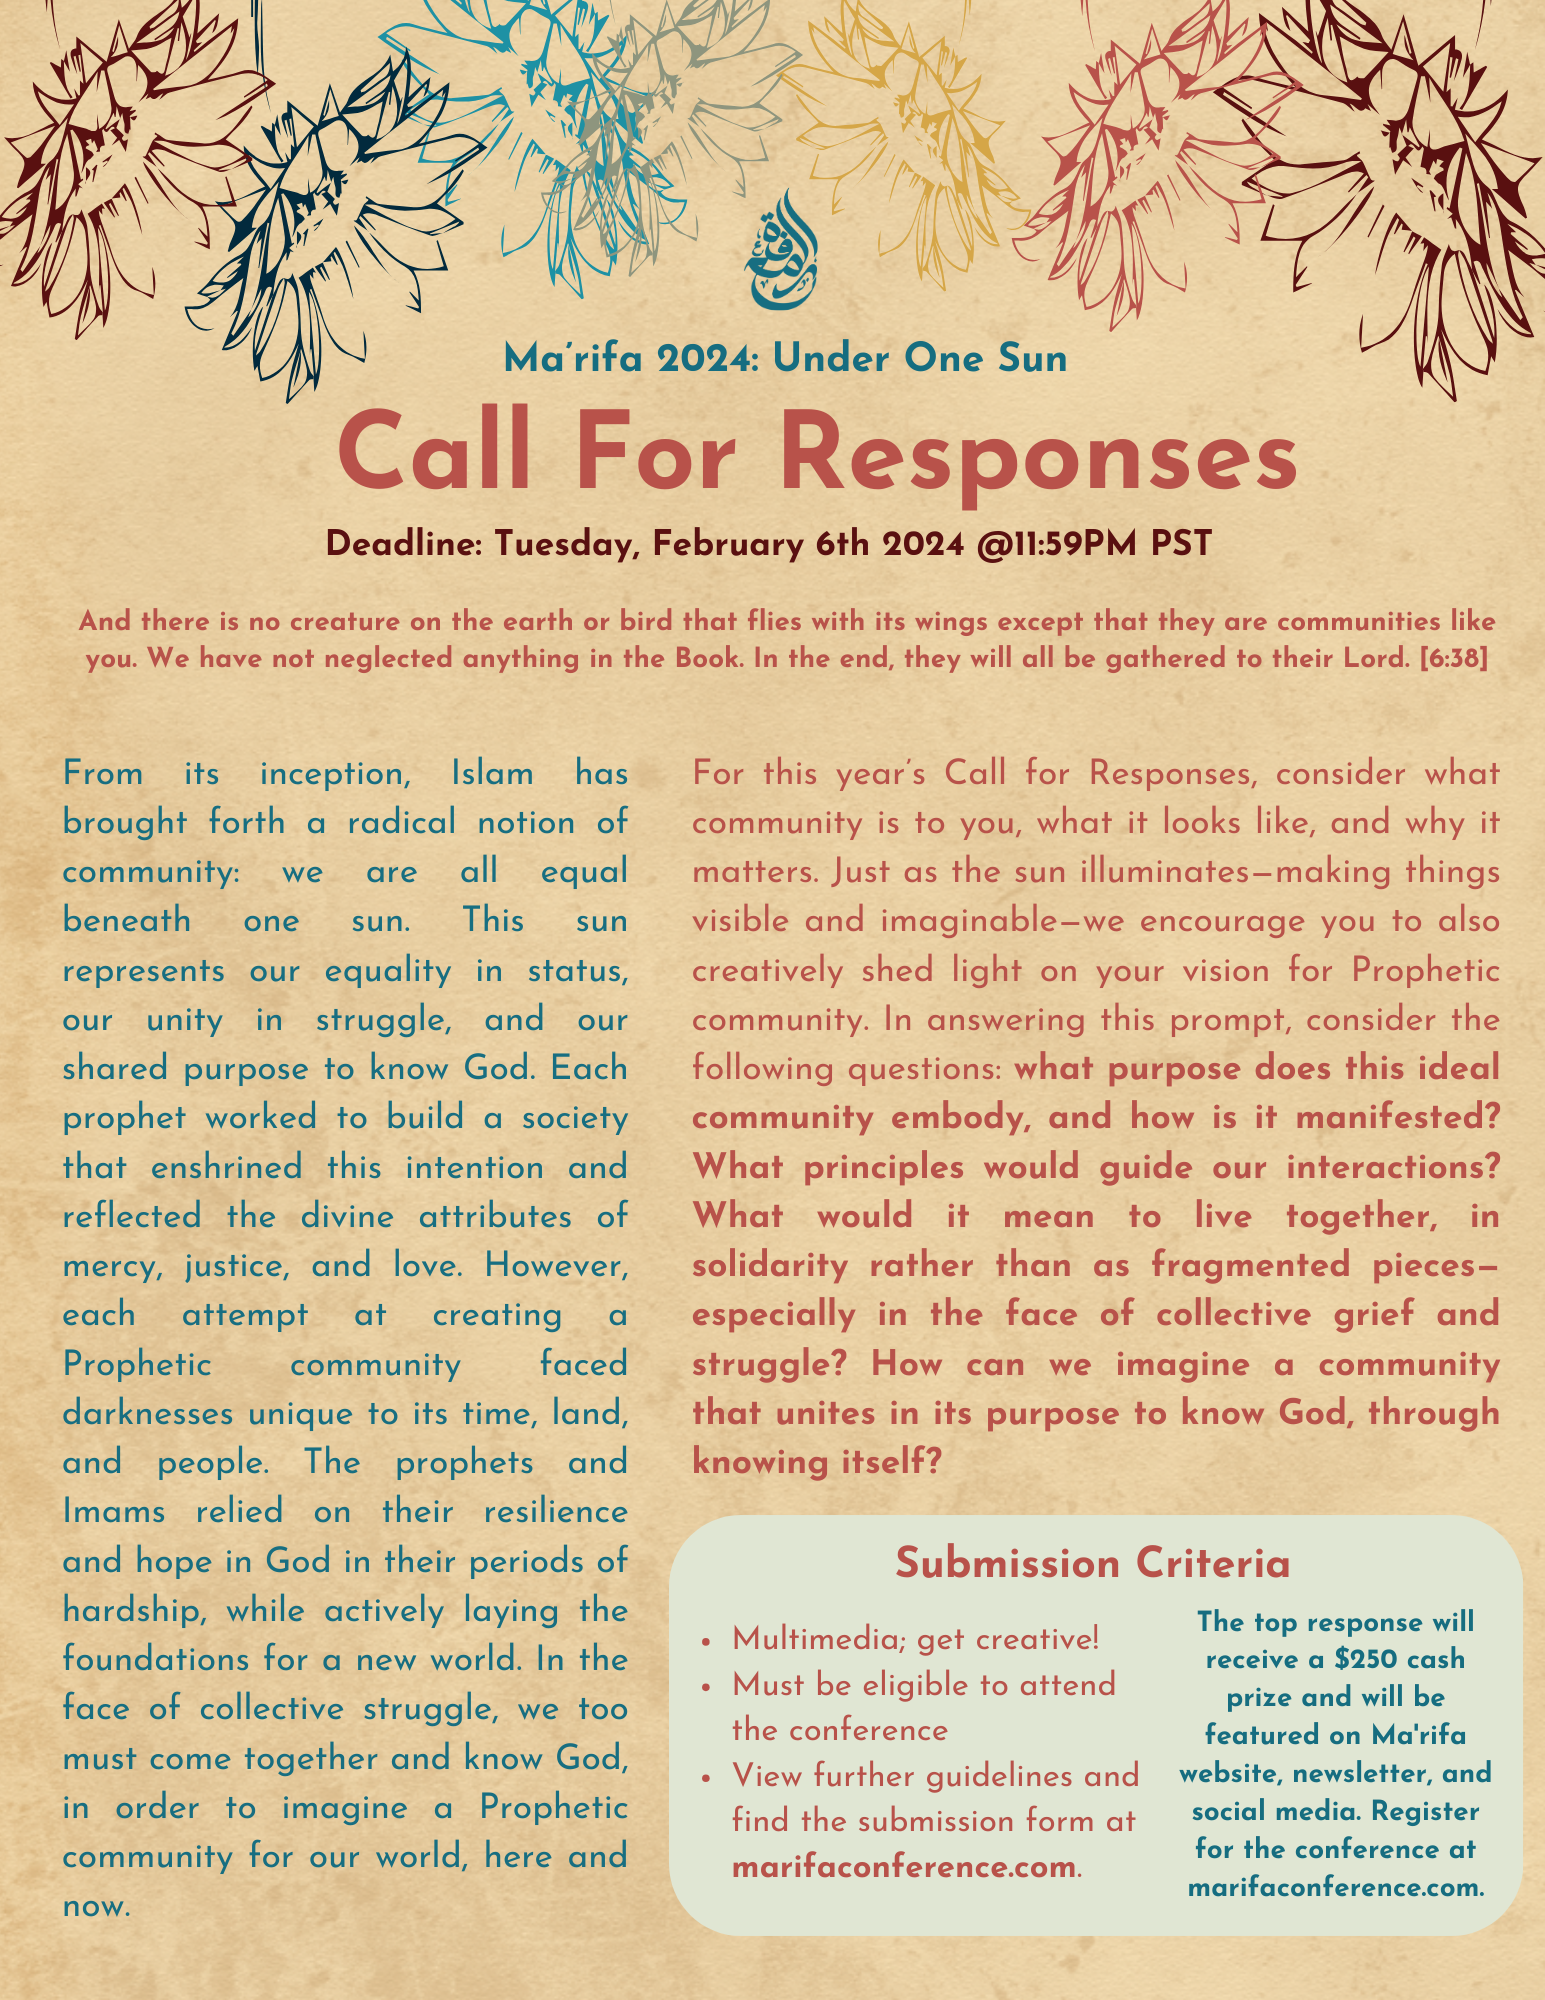 call-for-responses-prompt